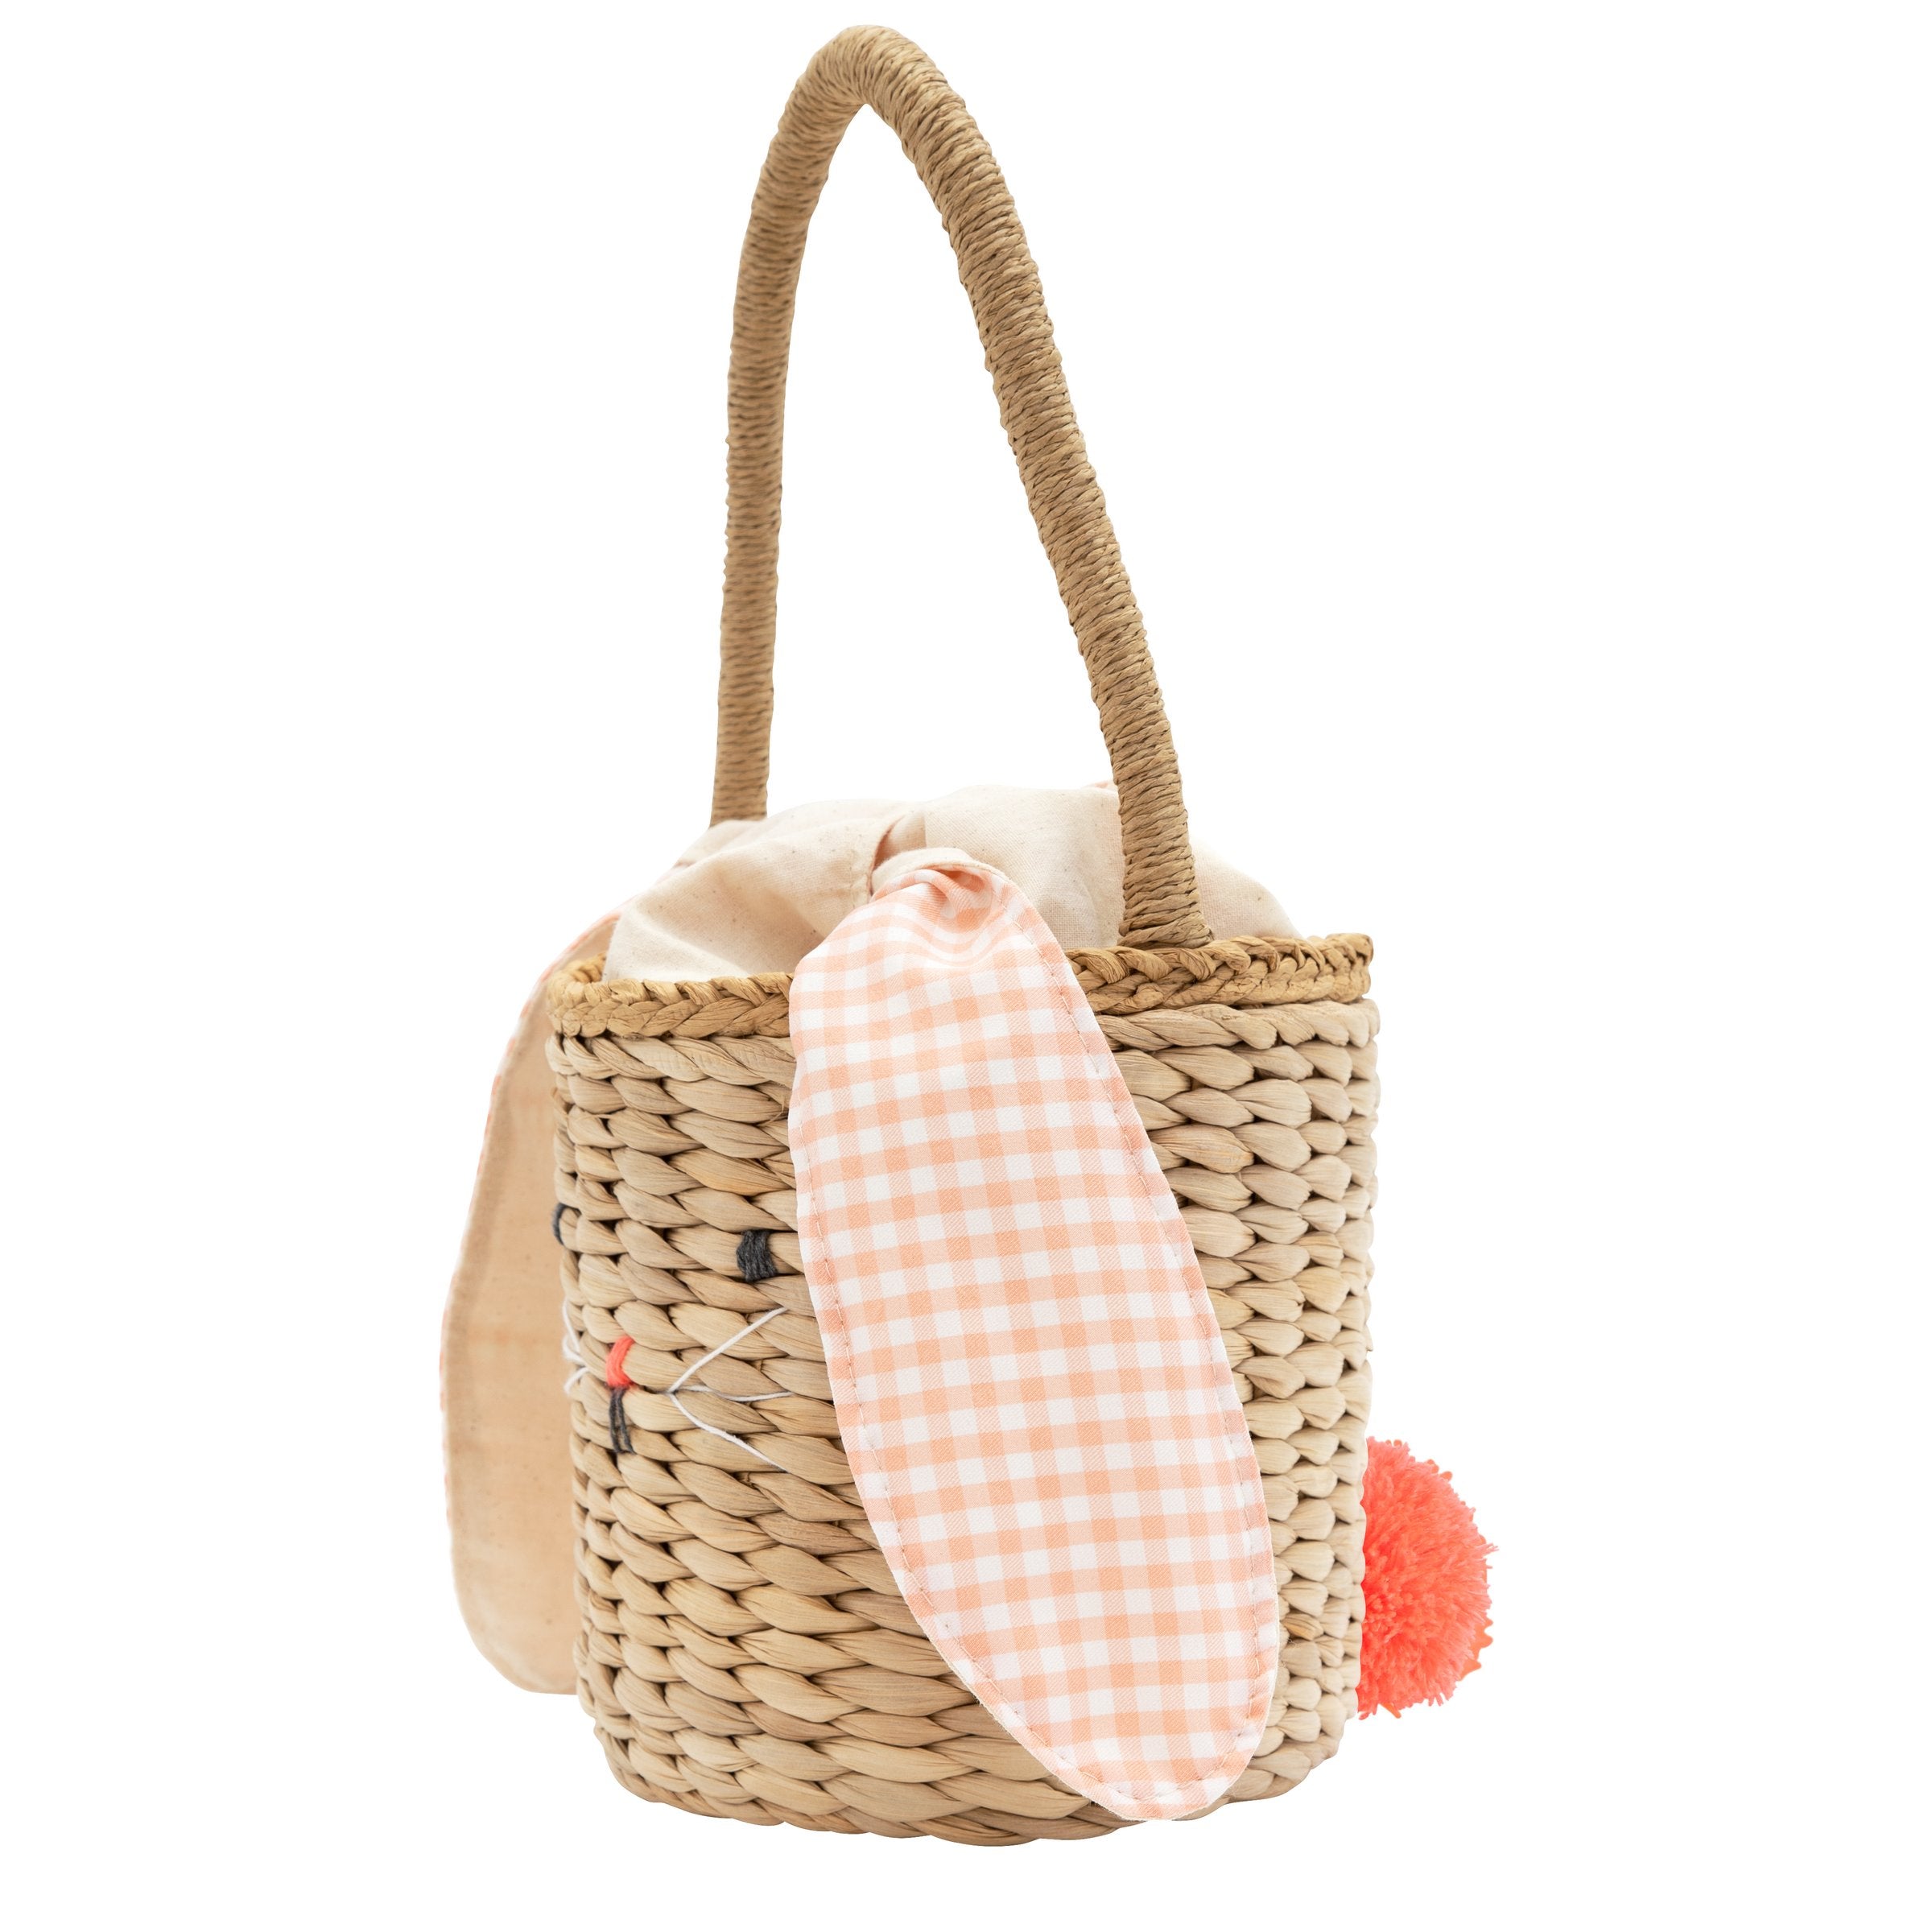 This basket is crafted from woven straw, with floppy ears, a sweet bunny face and a dellightful pompom tail.